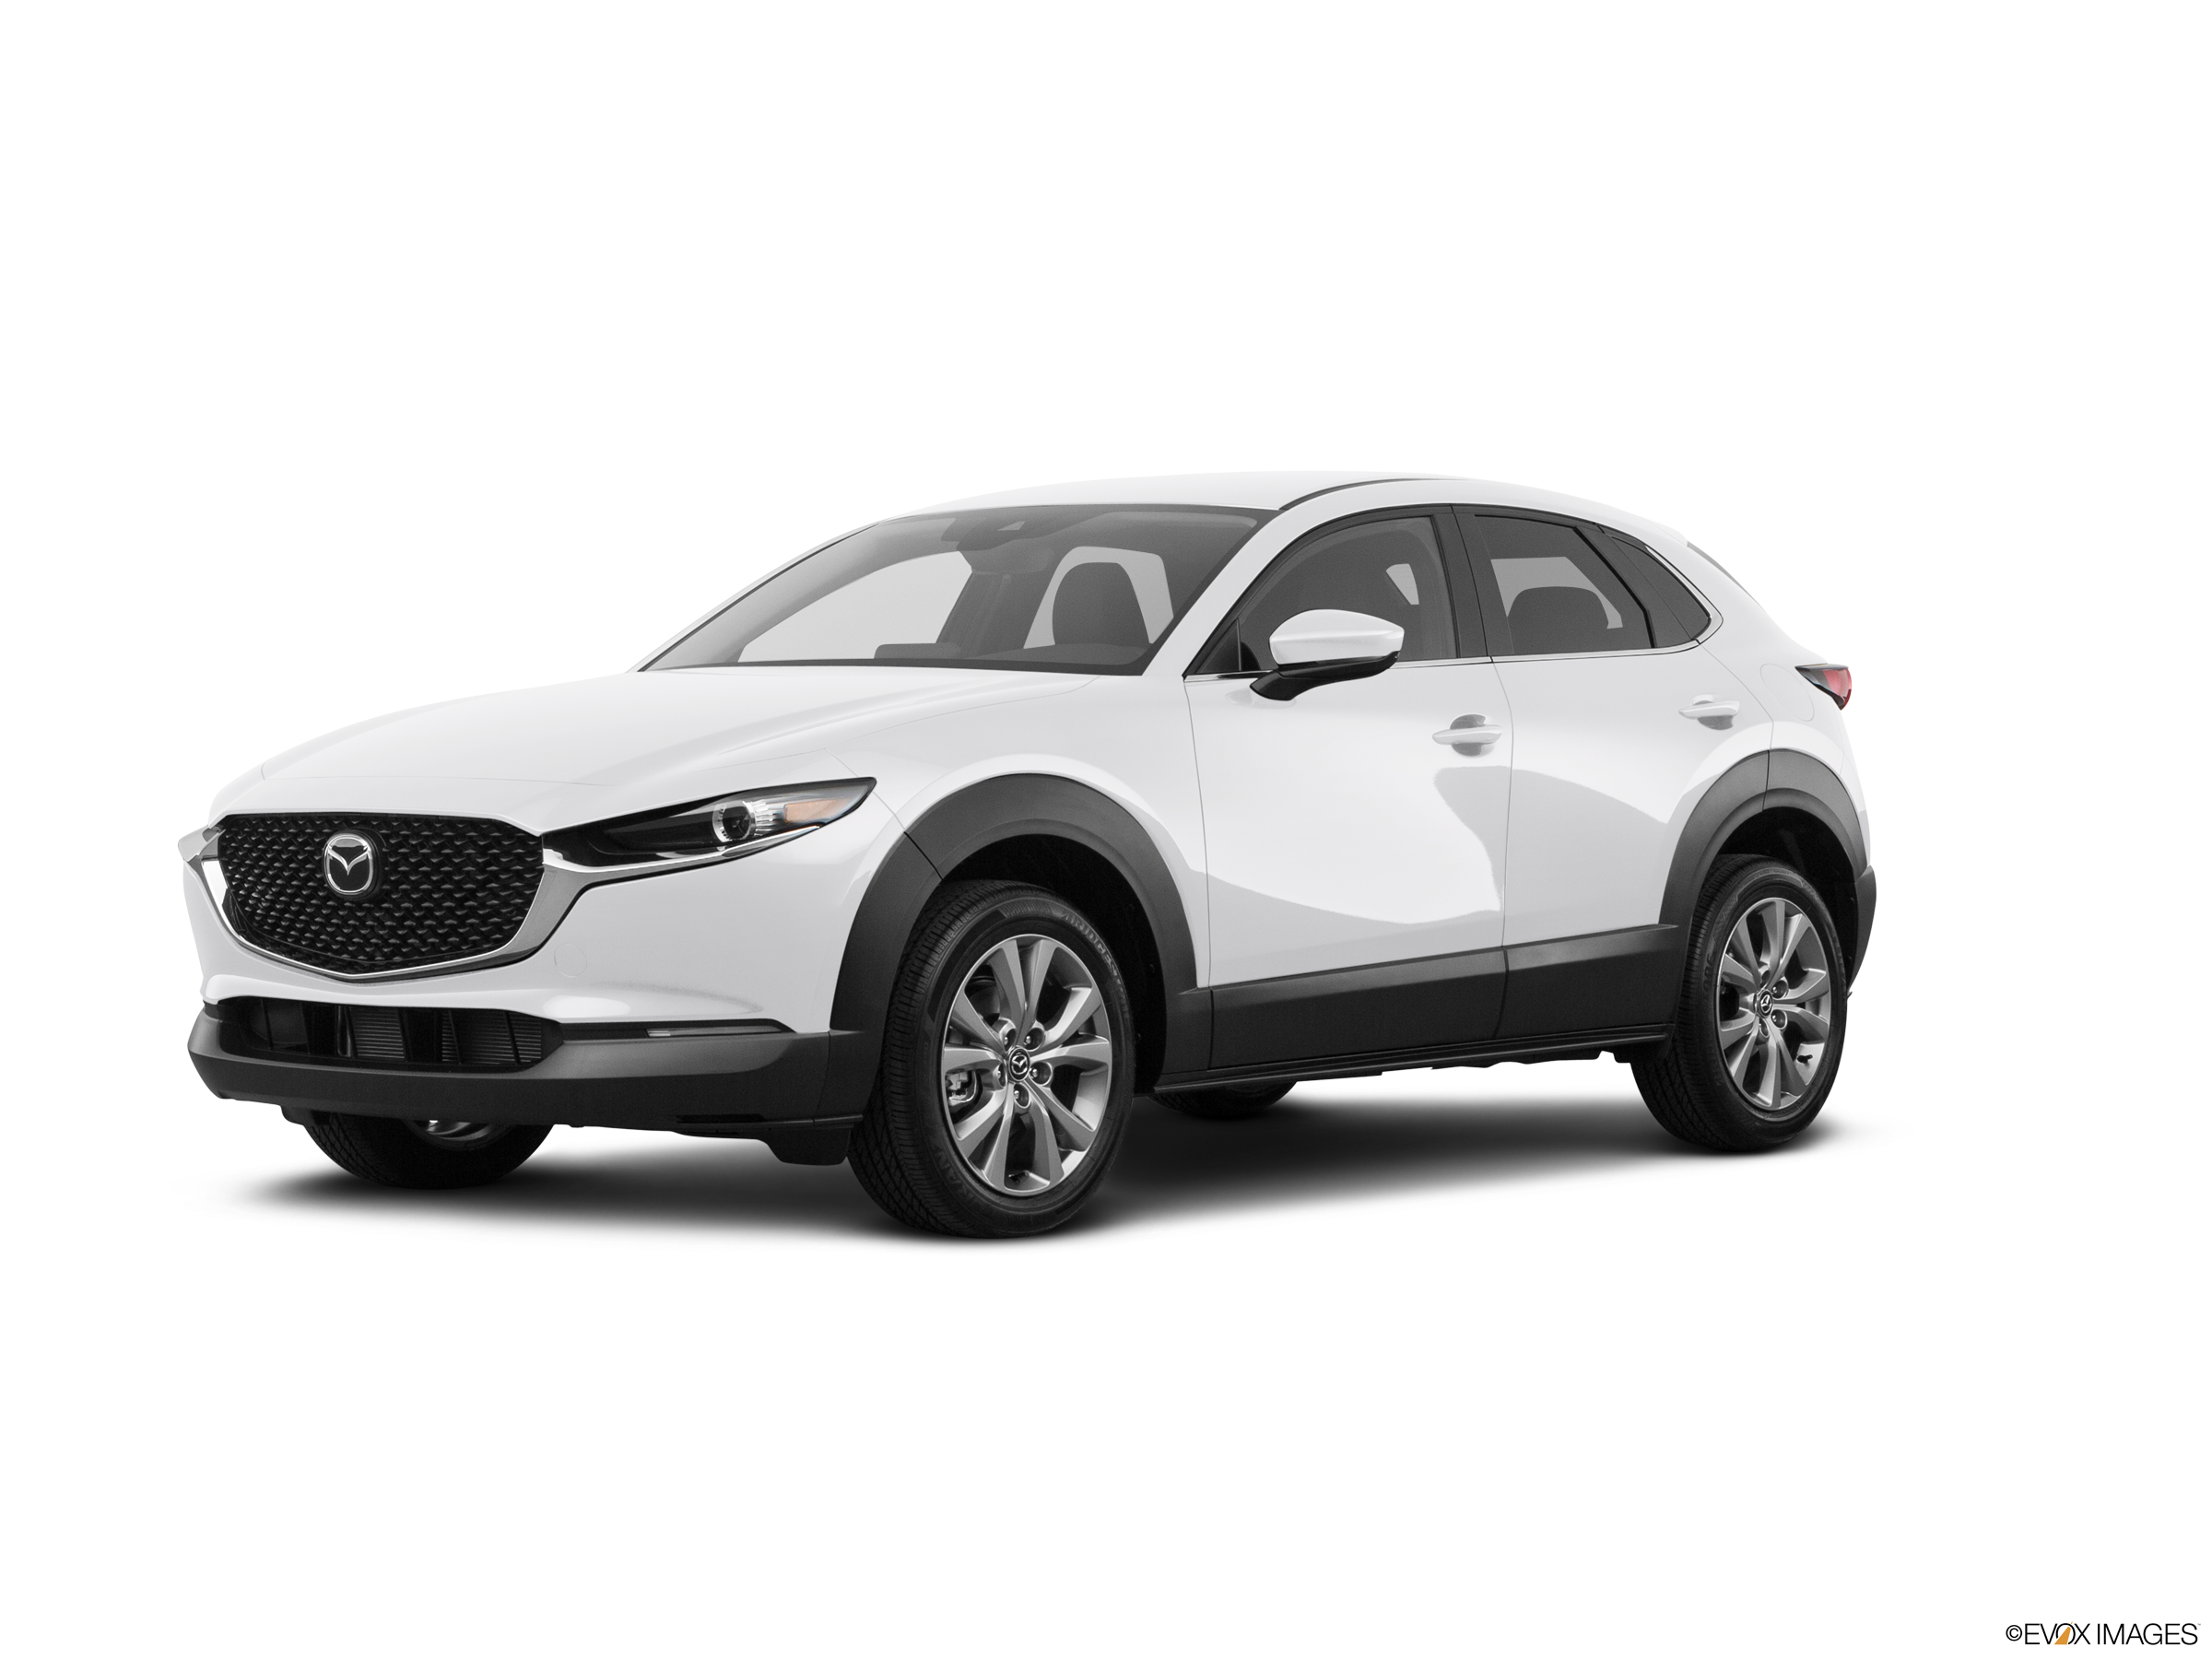 tale Vurdering Adgang New 2022 MAZDA CX-30 Select Prices | Kelley Blue Book